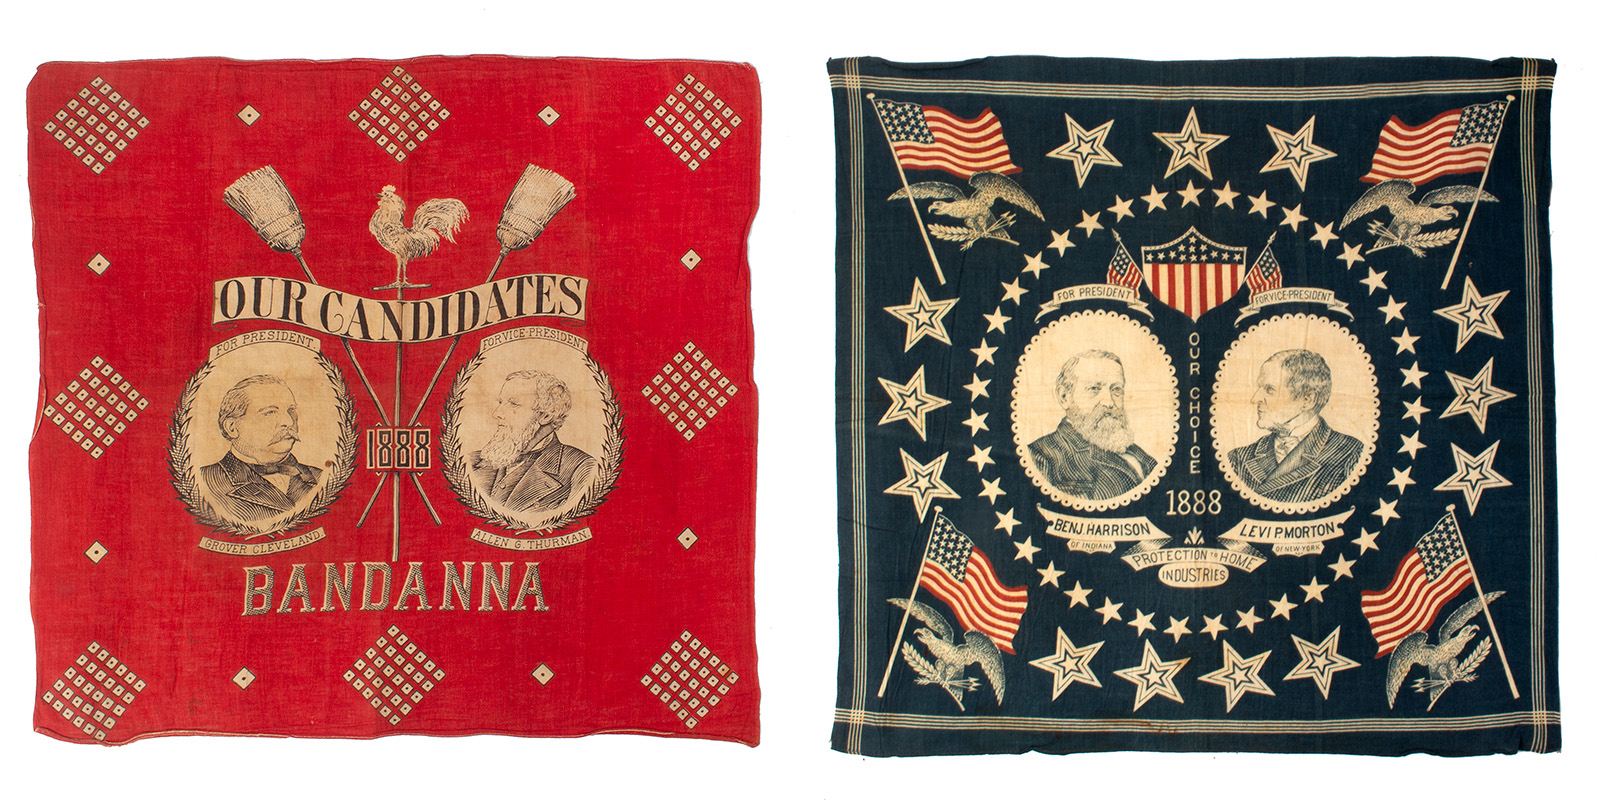 Pair of Bandanas for 1888 United States Presidential Election, Image 1